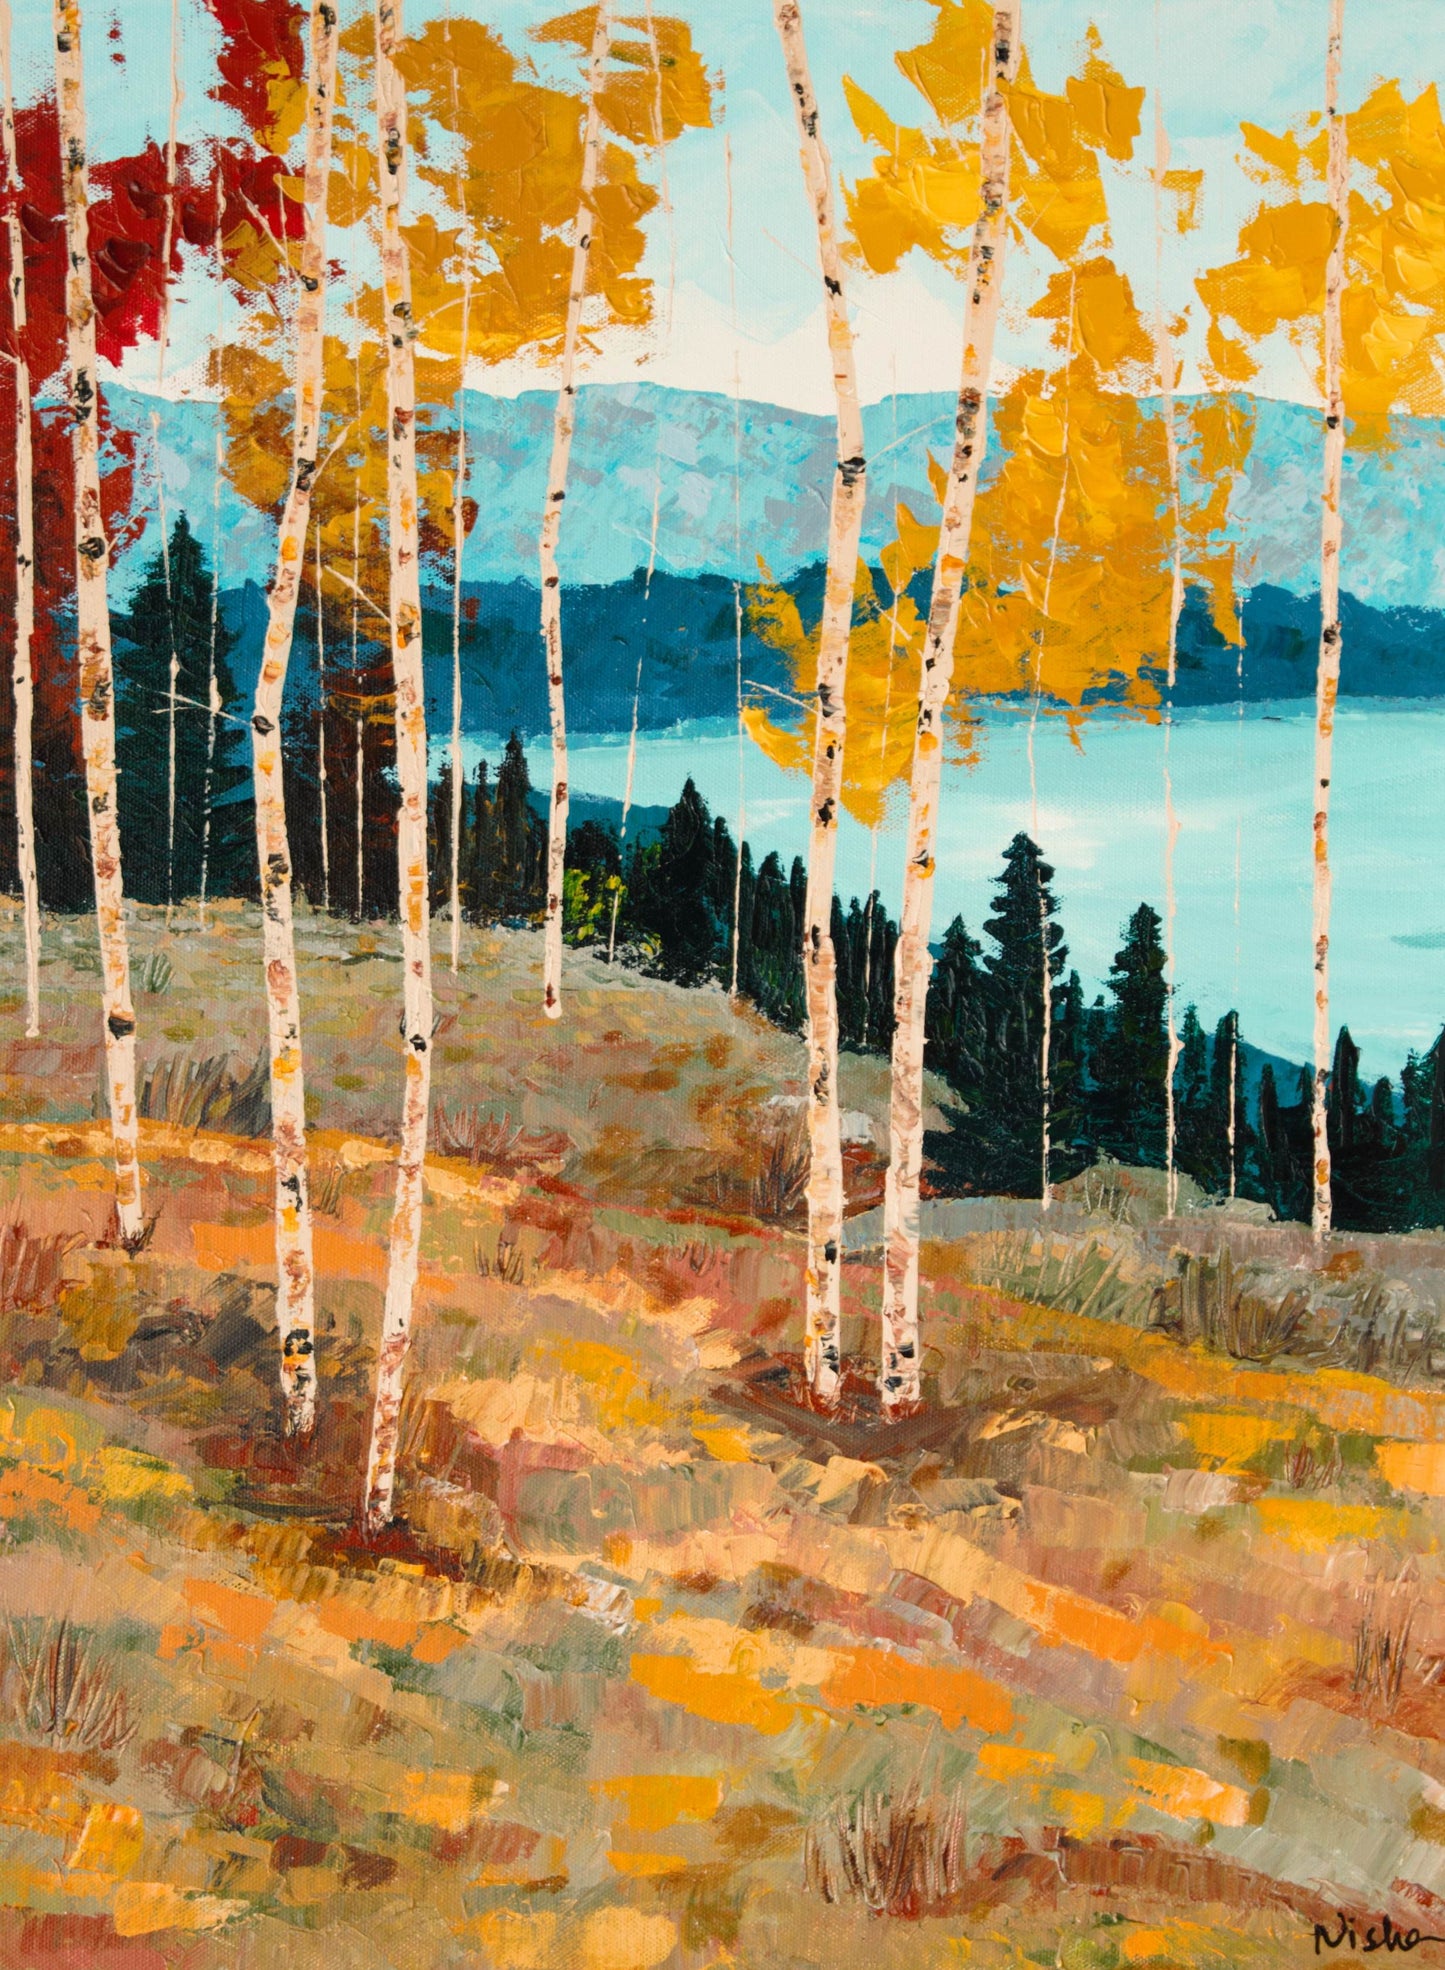 Print- Fall Landscape Painting with Aspen Trees - Aspen Gold